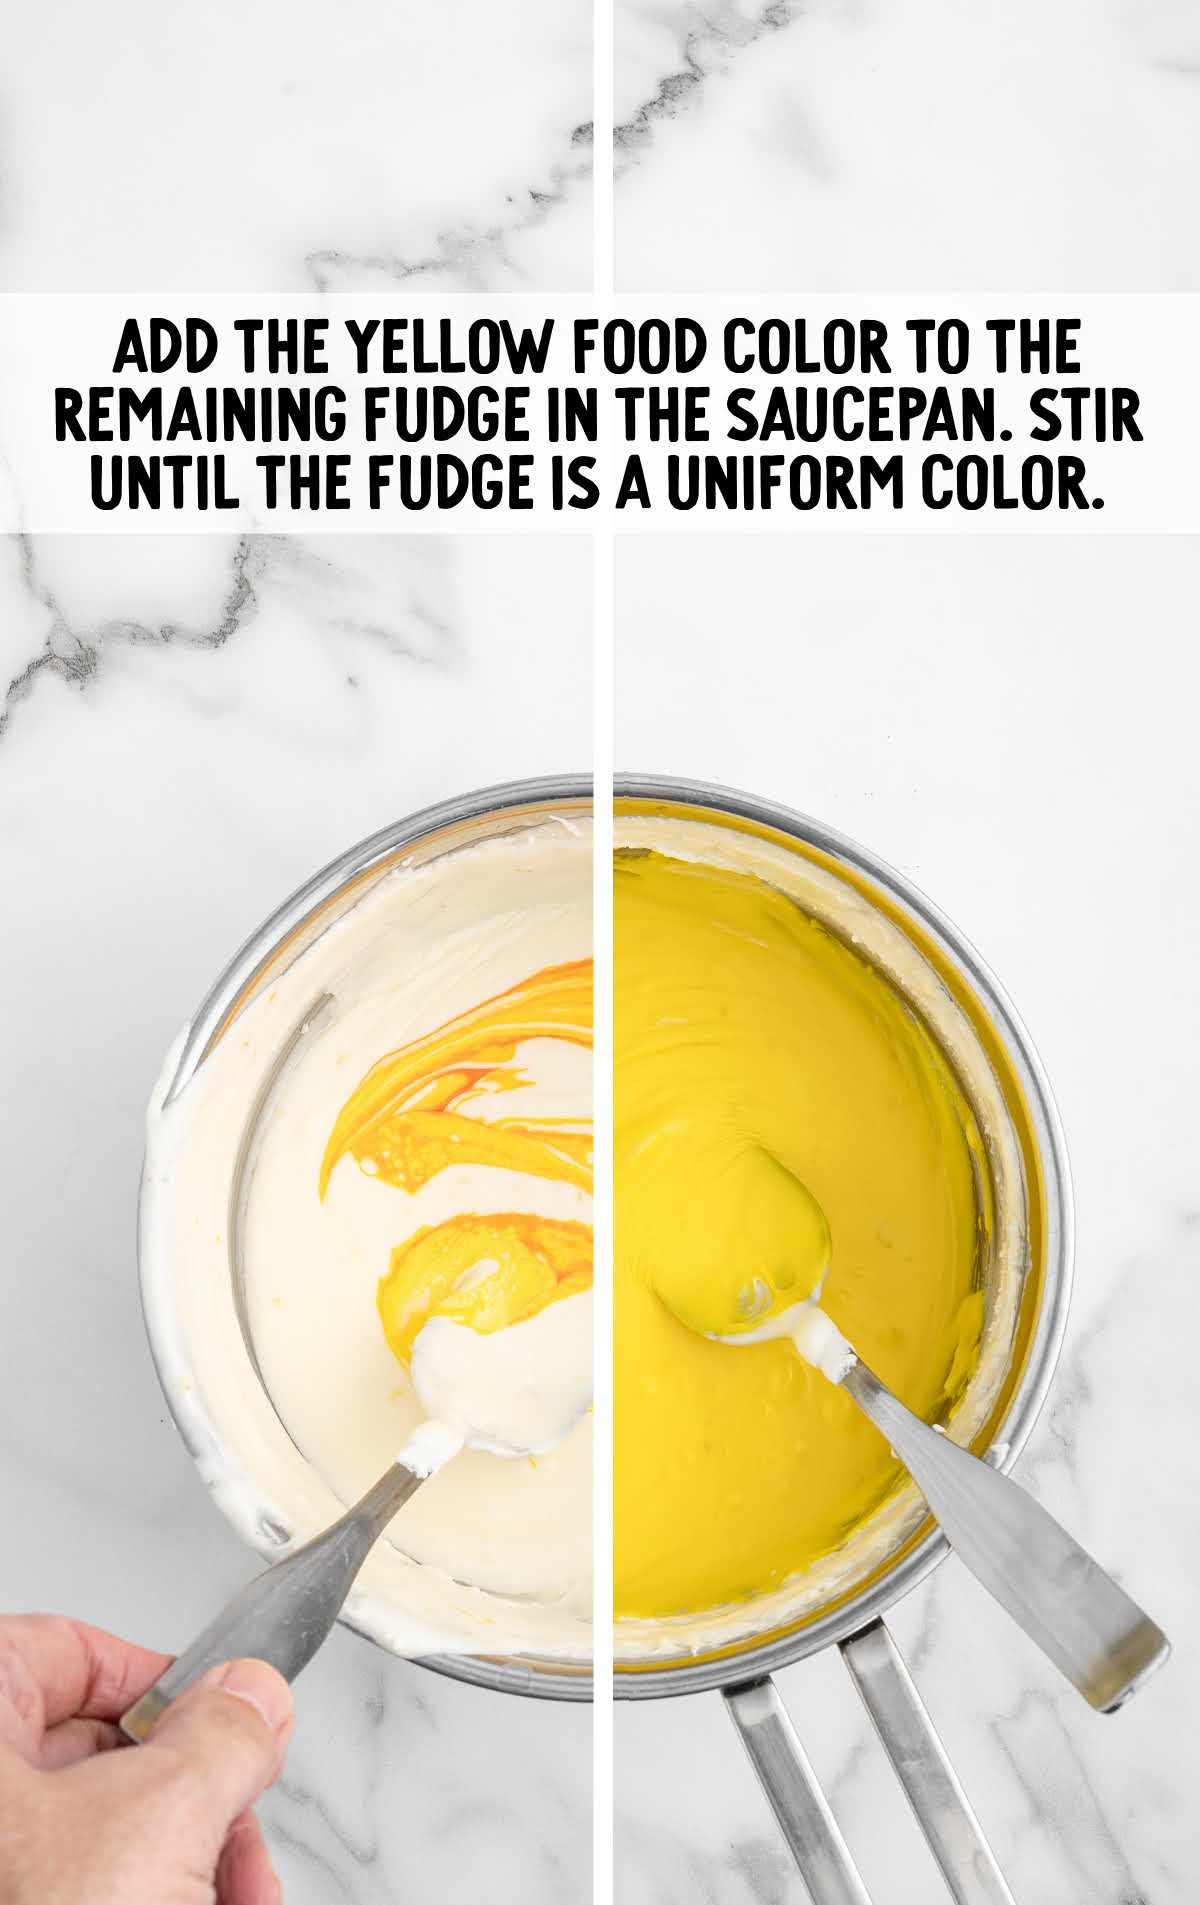 yellow food coloring added to the fudge in a saucepan